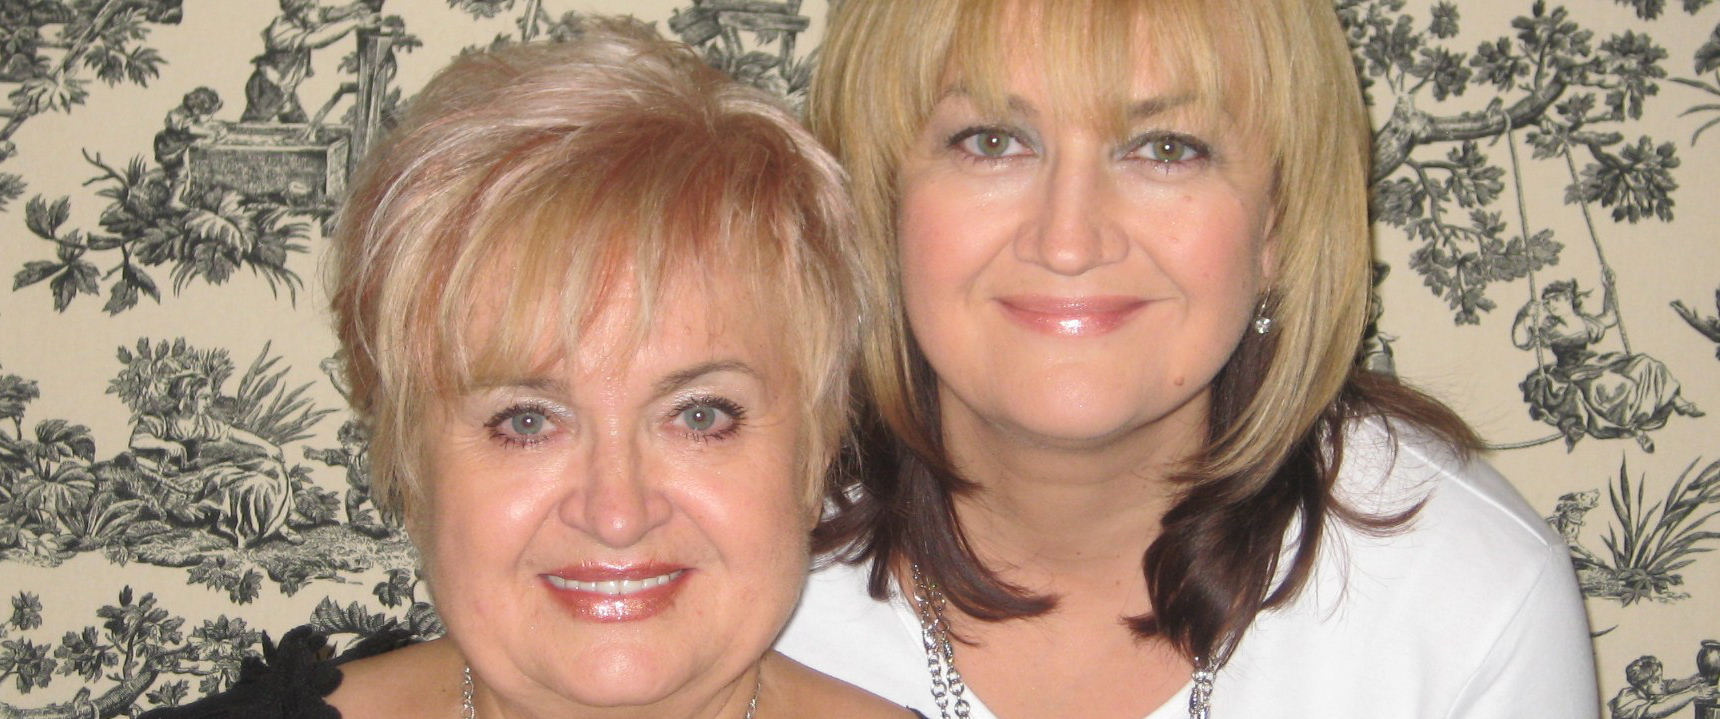 Drapery Solutions is the mother and daughter team of Stacy Musial and Yolanda Balcerzak